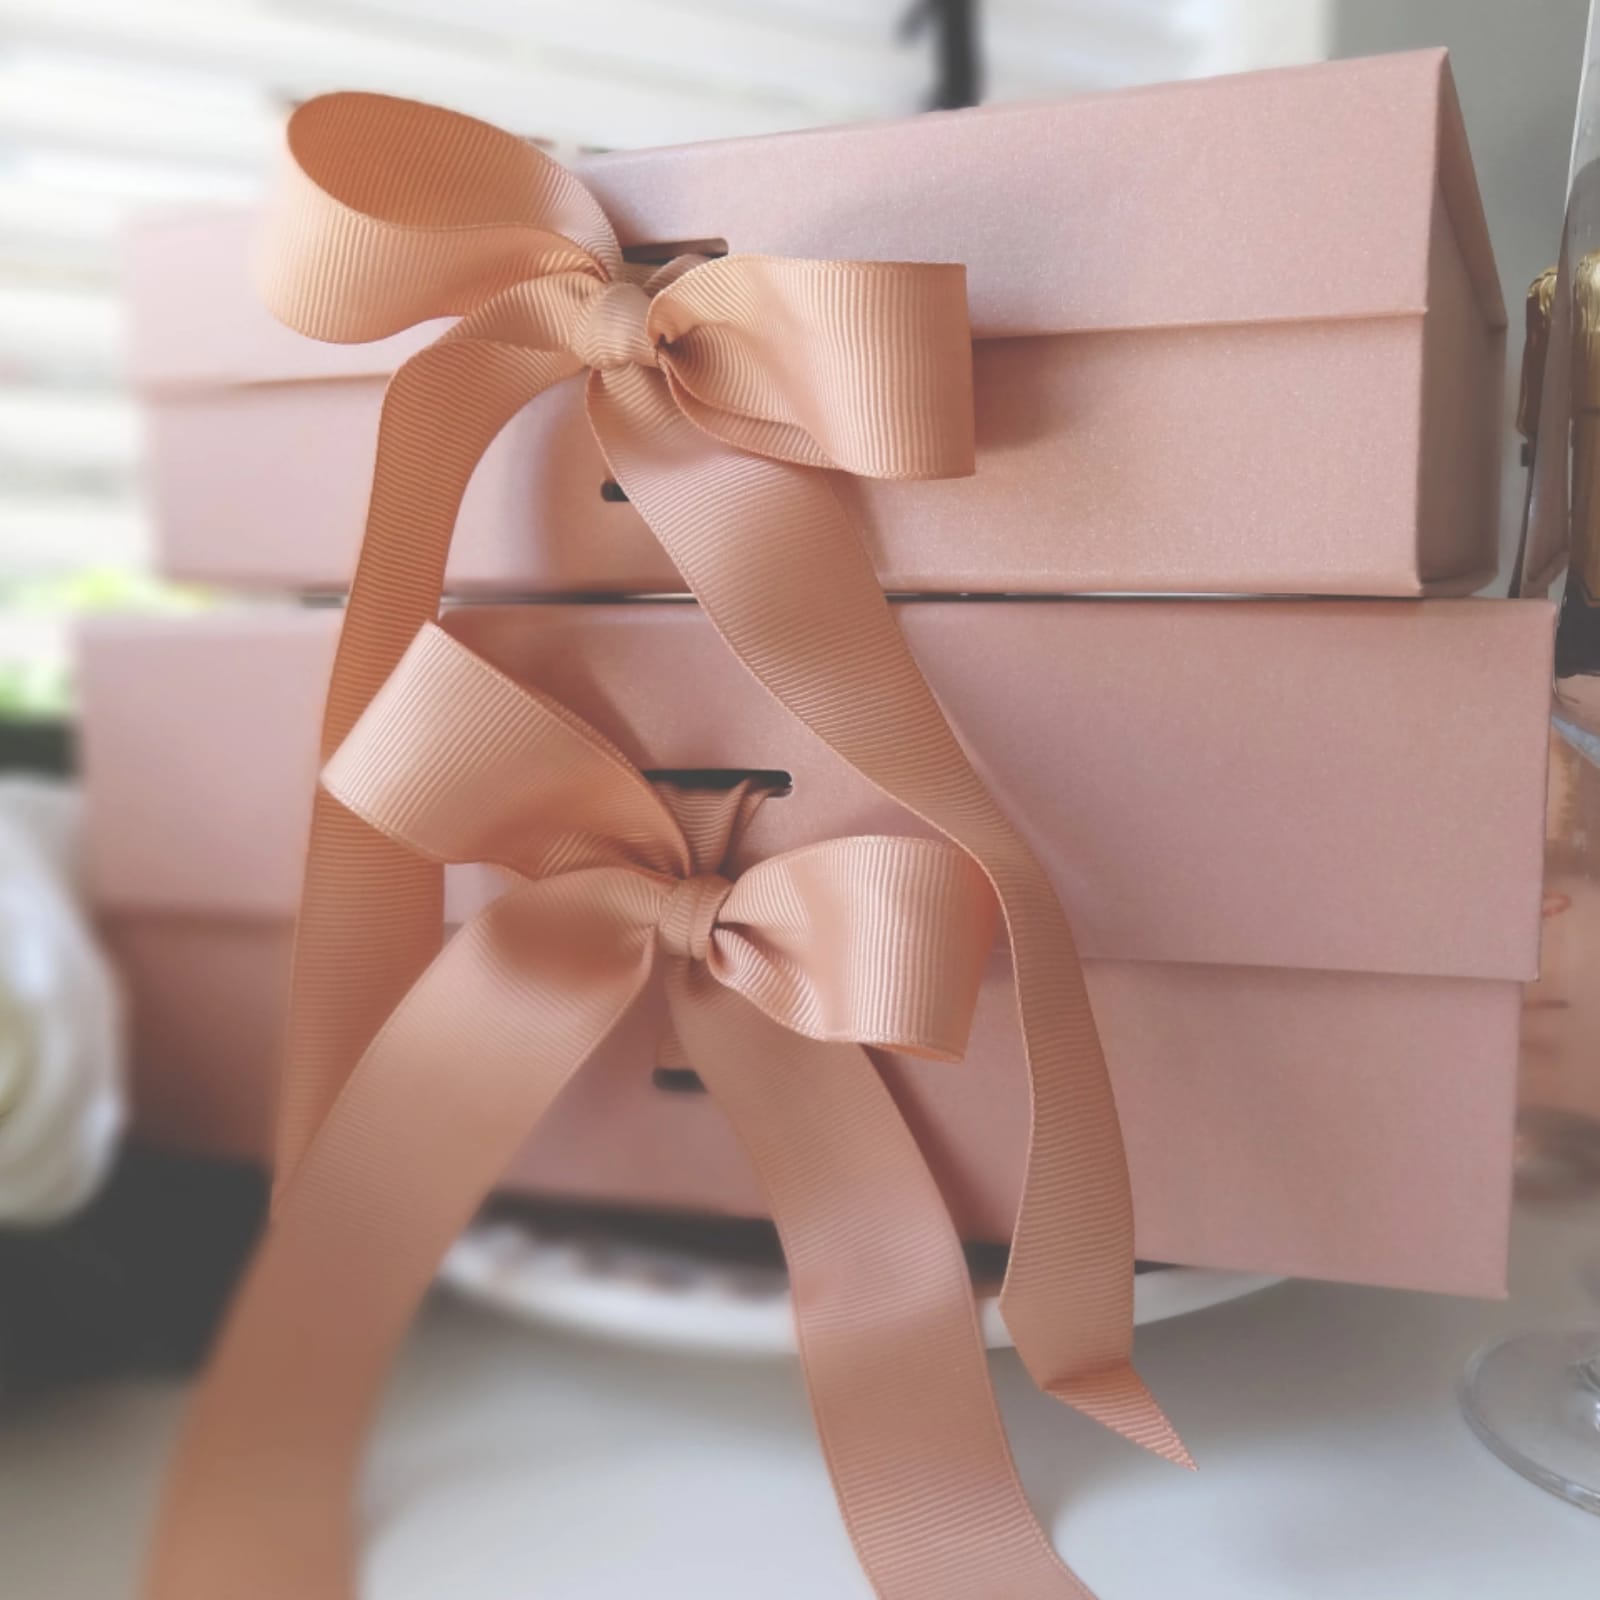 Best Gift for Friend's Marriage – Between Boxes Gifts